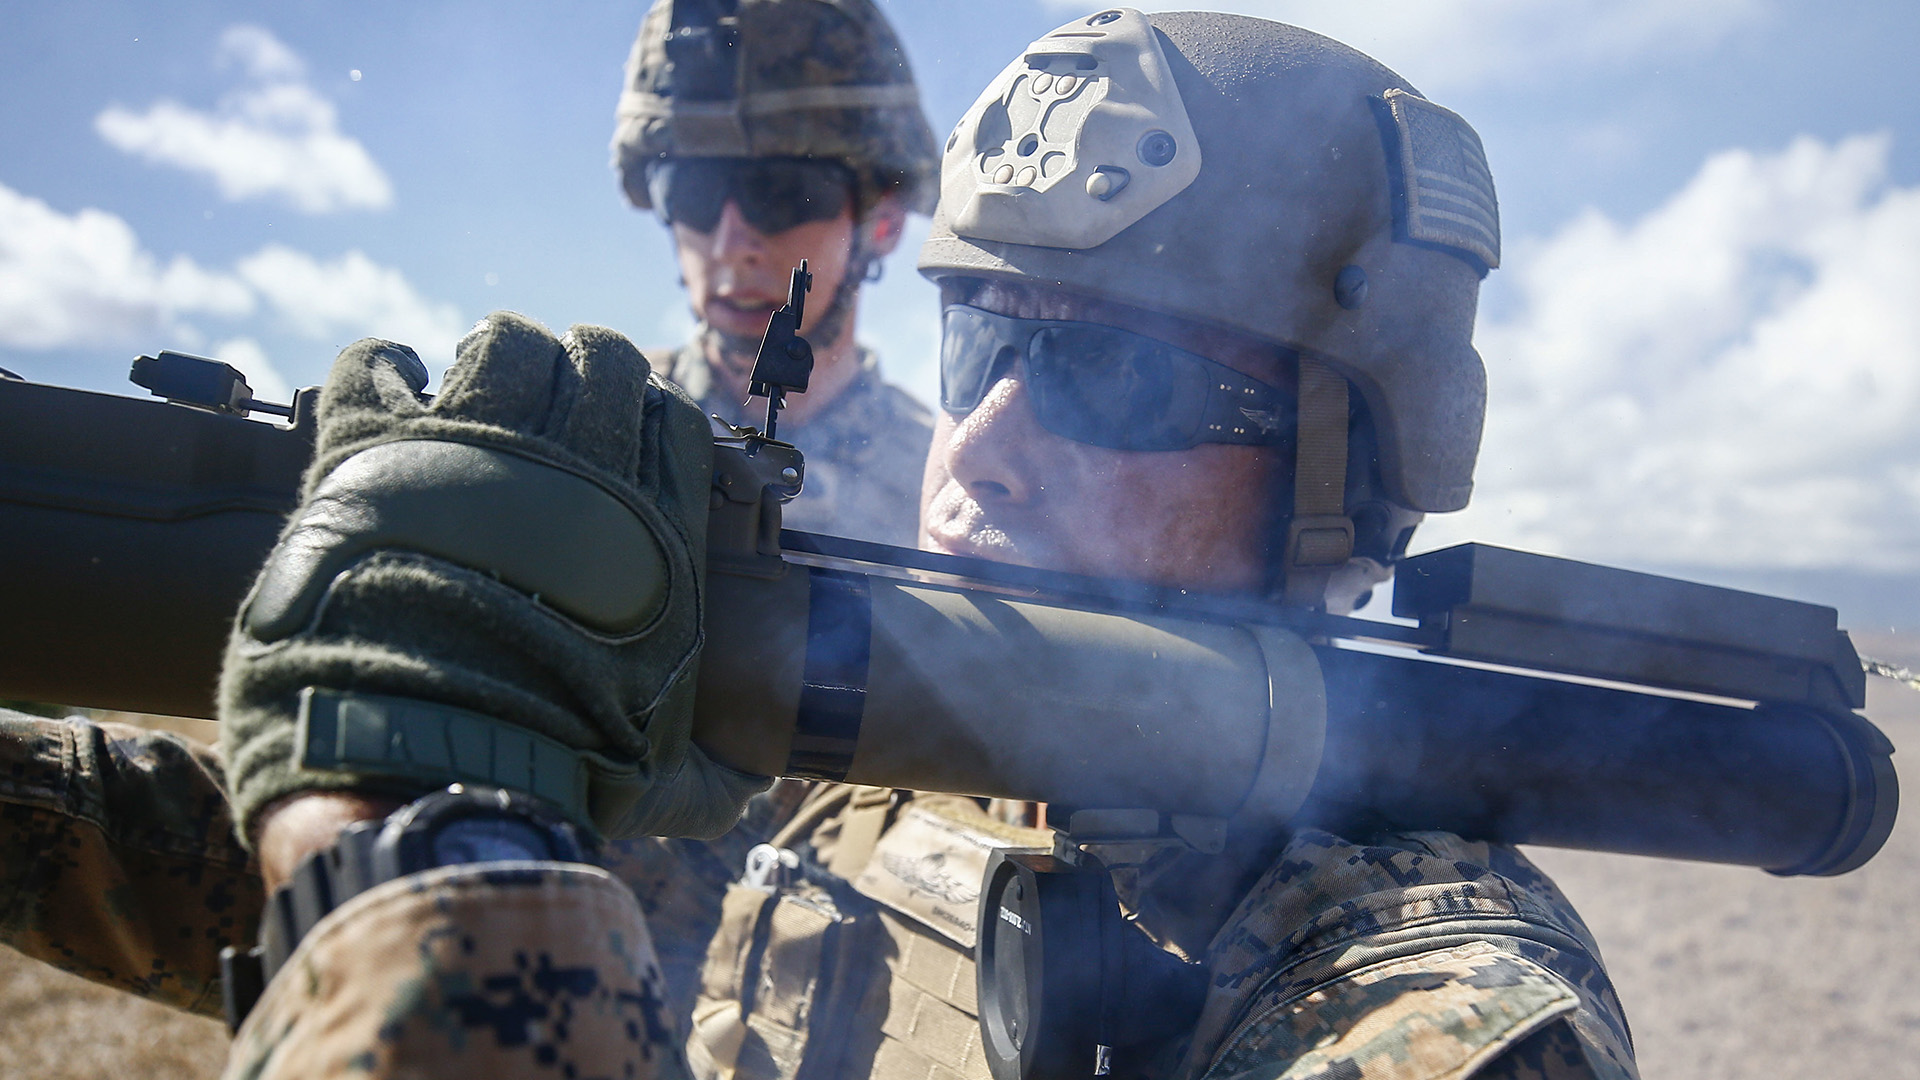 Marines fielding new light assault weapon with reduced backblast